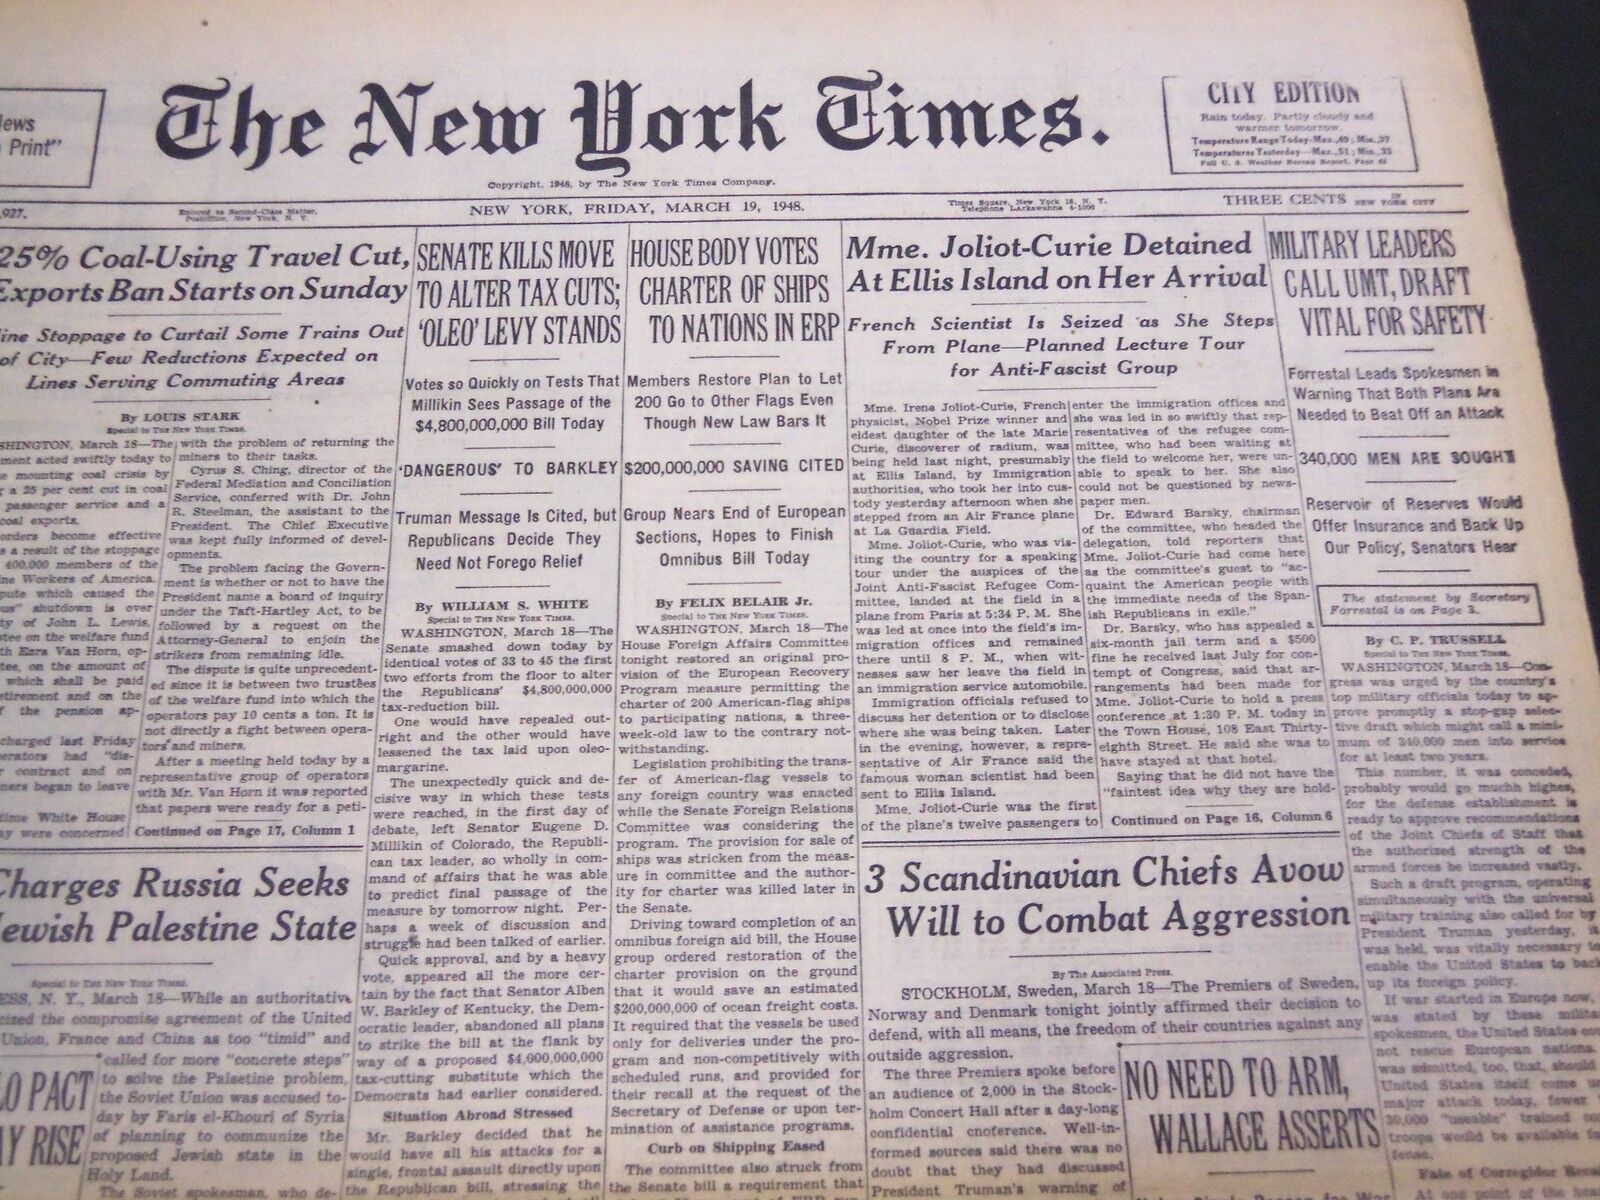 1948 MARCH 19 NEW YORK TIMES - JOLIOT-CURIE DETAINED AT ELLIS ISLAND - NT 4352